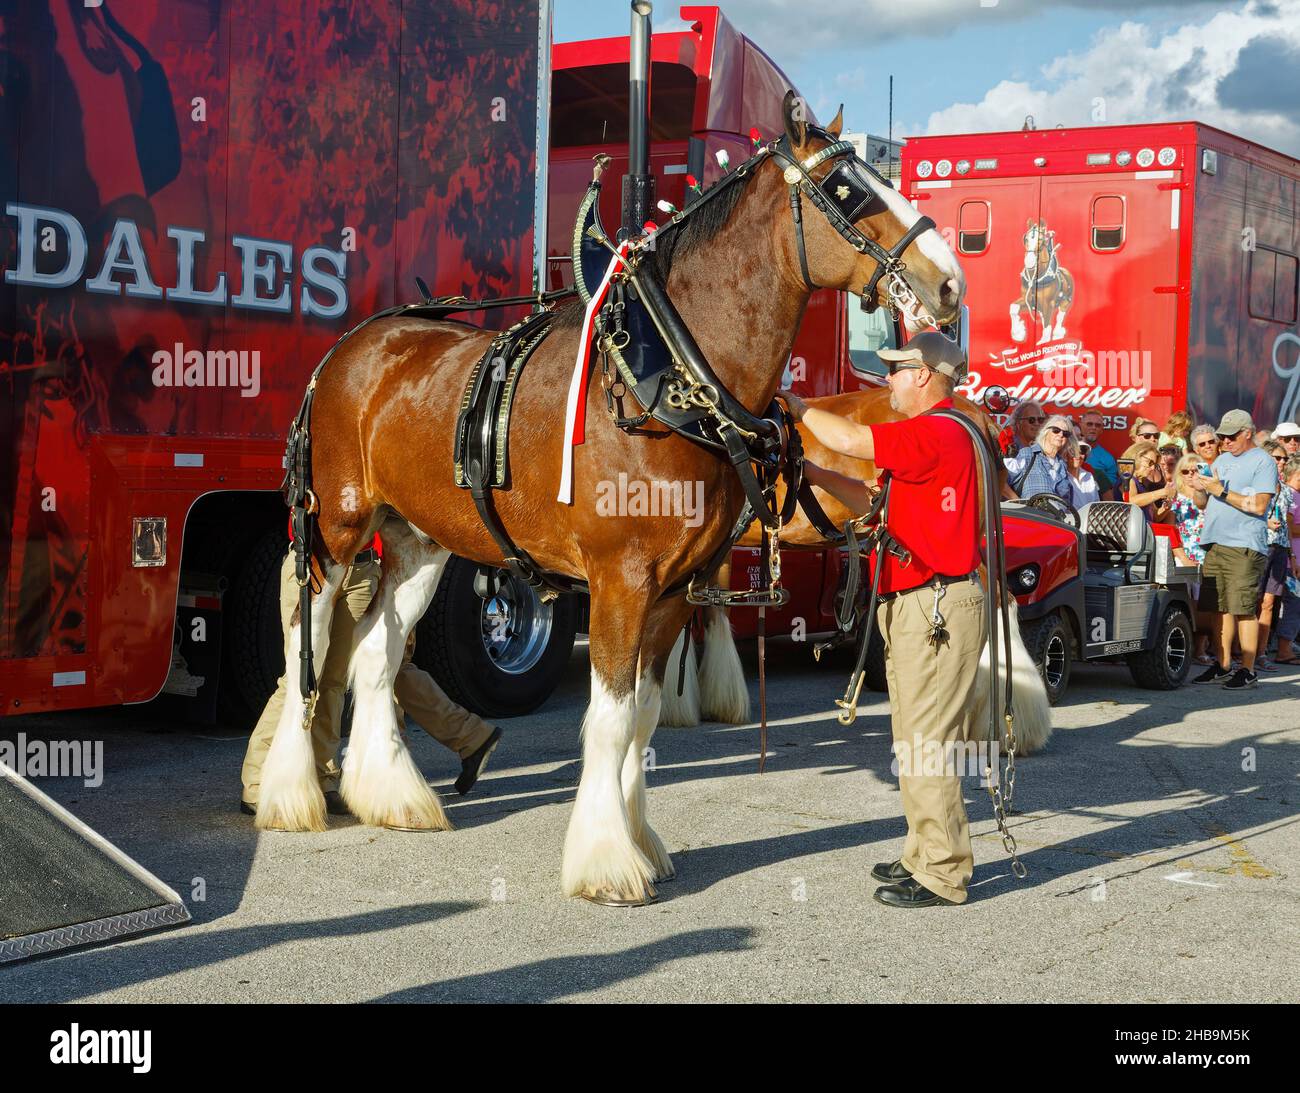 Clydesdale, large tack being placed, big animal, male attendant, draught horse, bay color, Budweiser Brewery, Equus ferus caballus, equine, red transp Stock Photo